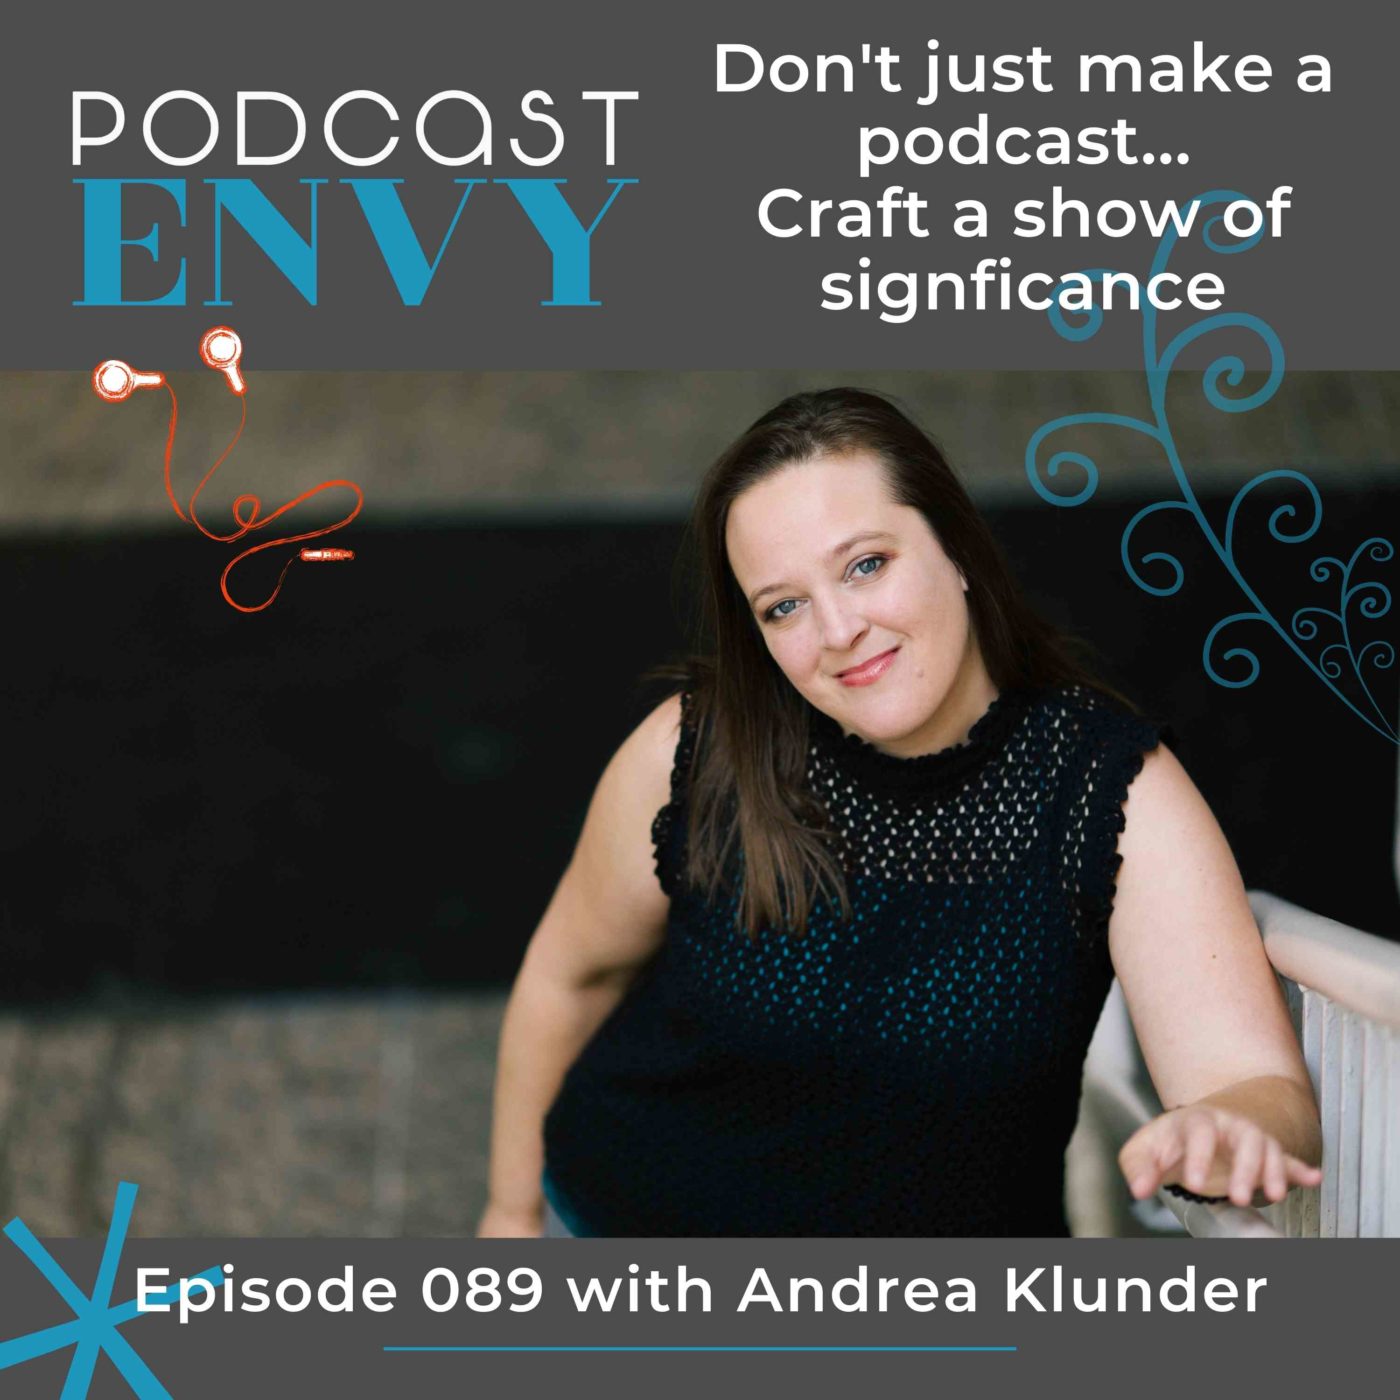 089: Don’t just make a podcast… Craft a show of significance!